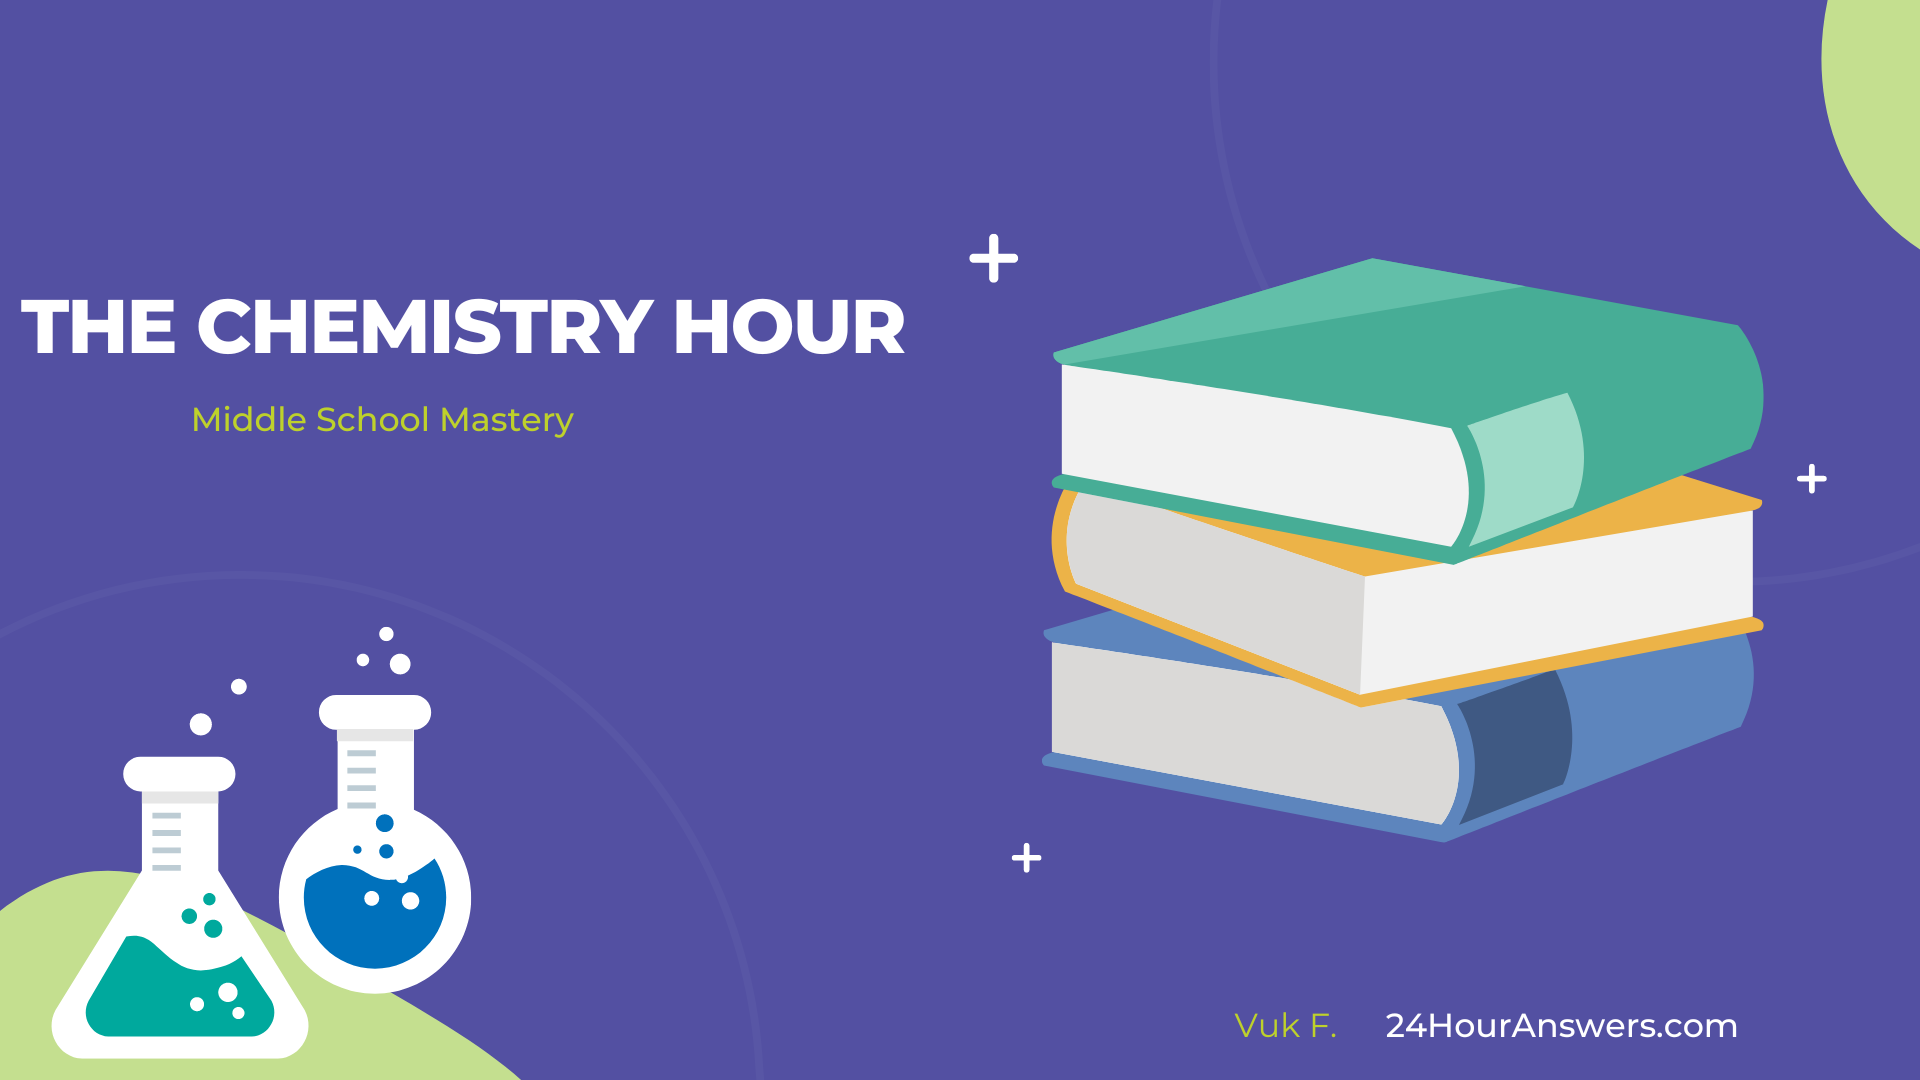 The Chemistry Hour: Middle School Mastery